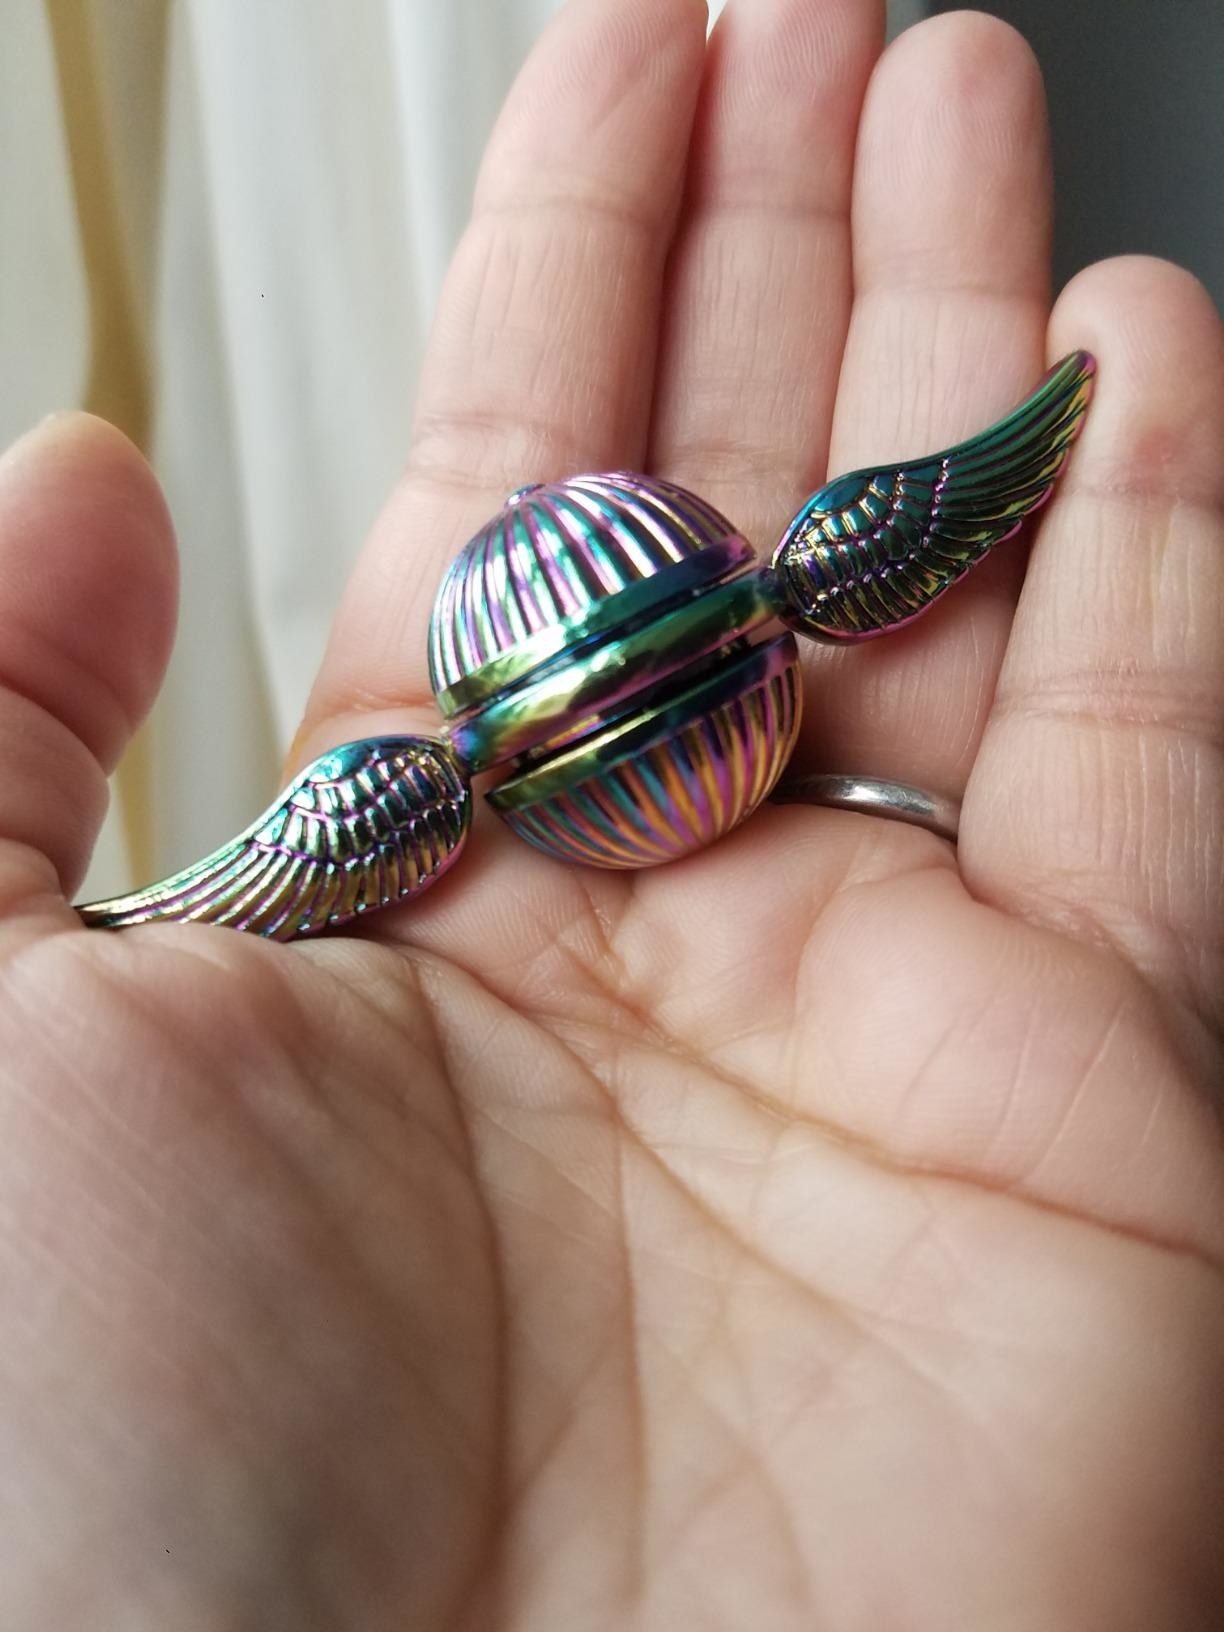 Reviewer holding the rainbow toy that looks like a Flying Snitch with wings coming out of the sides